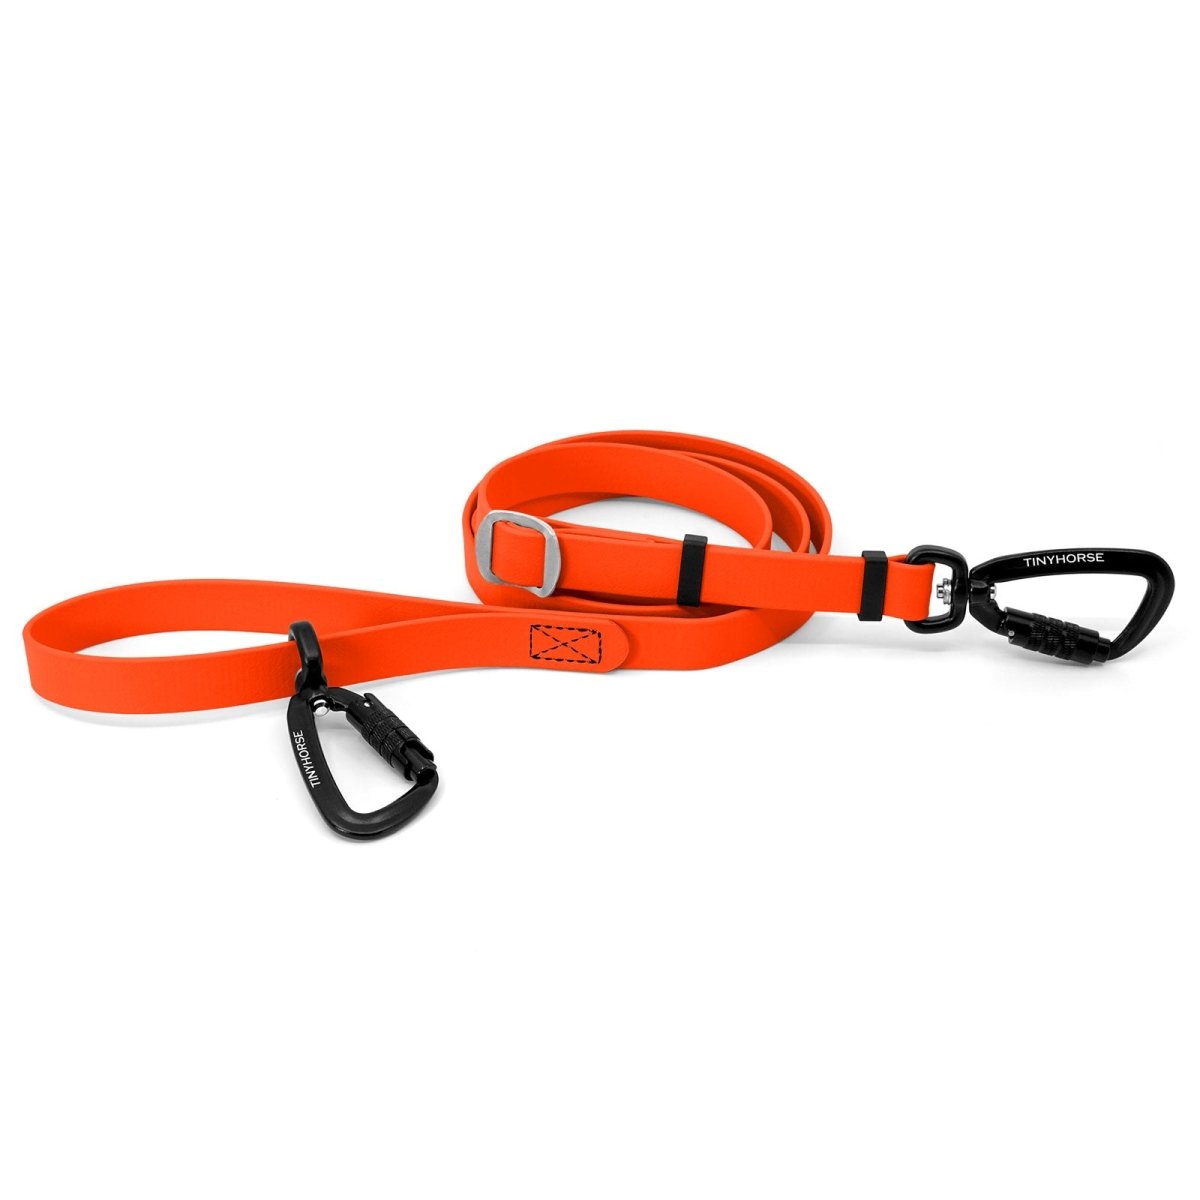 An adjustable neon orange-coloured Lead-All Pro Extra made of BioThane with 2 auto-locking carabiners